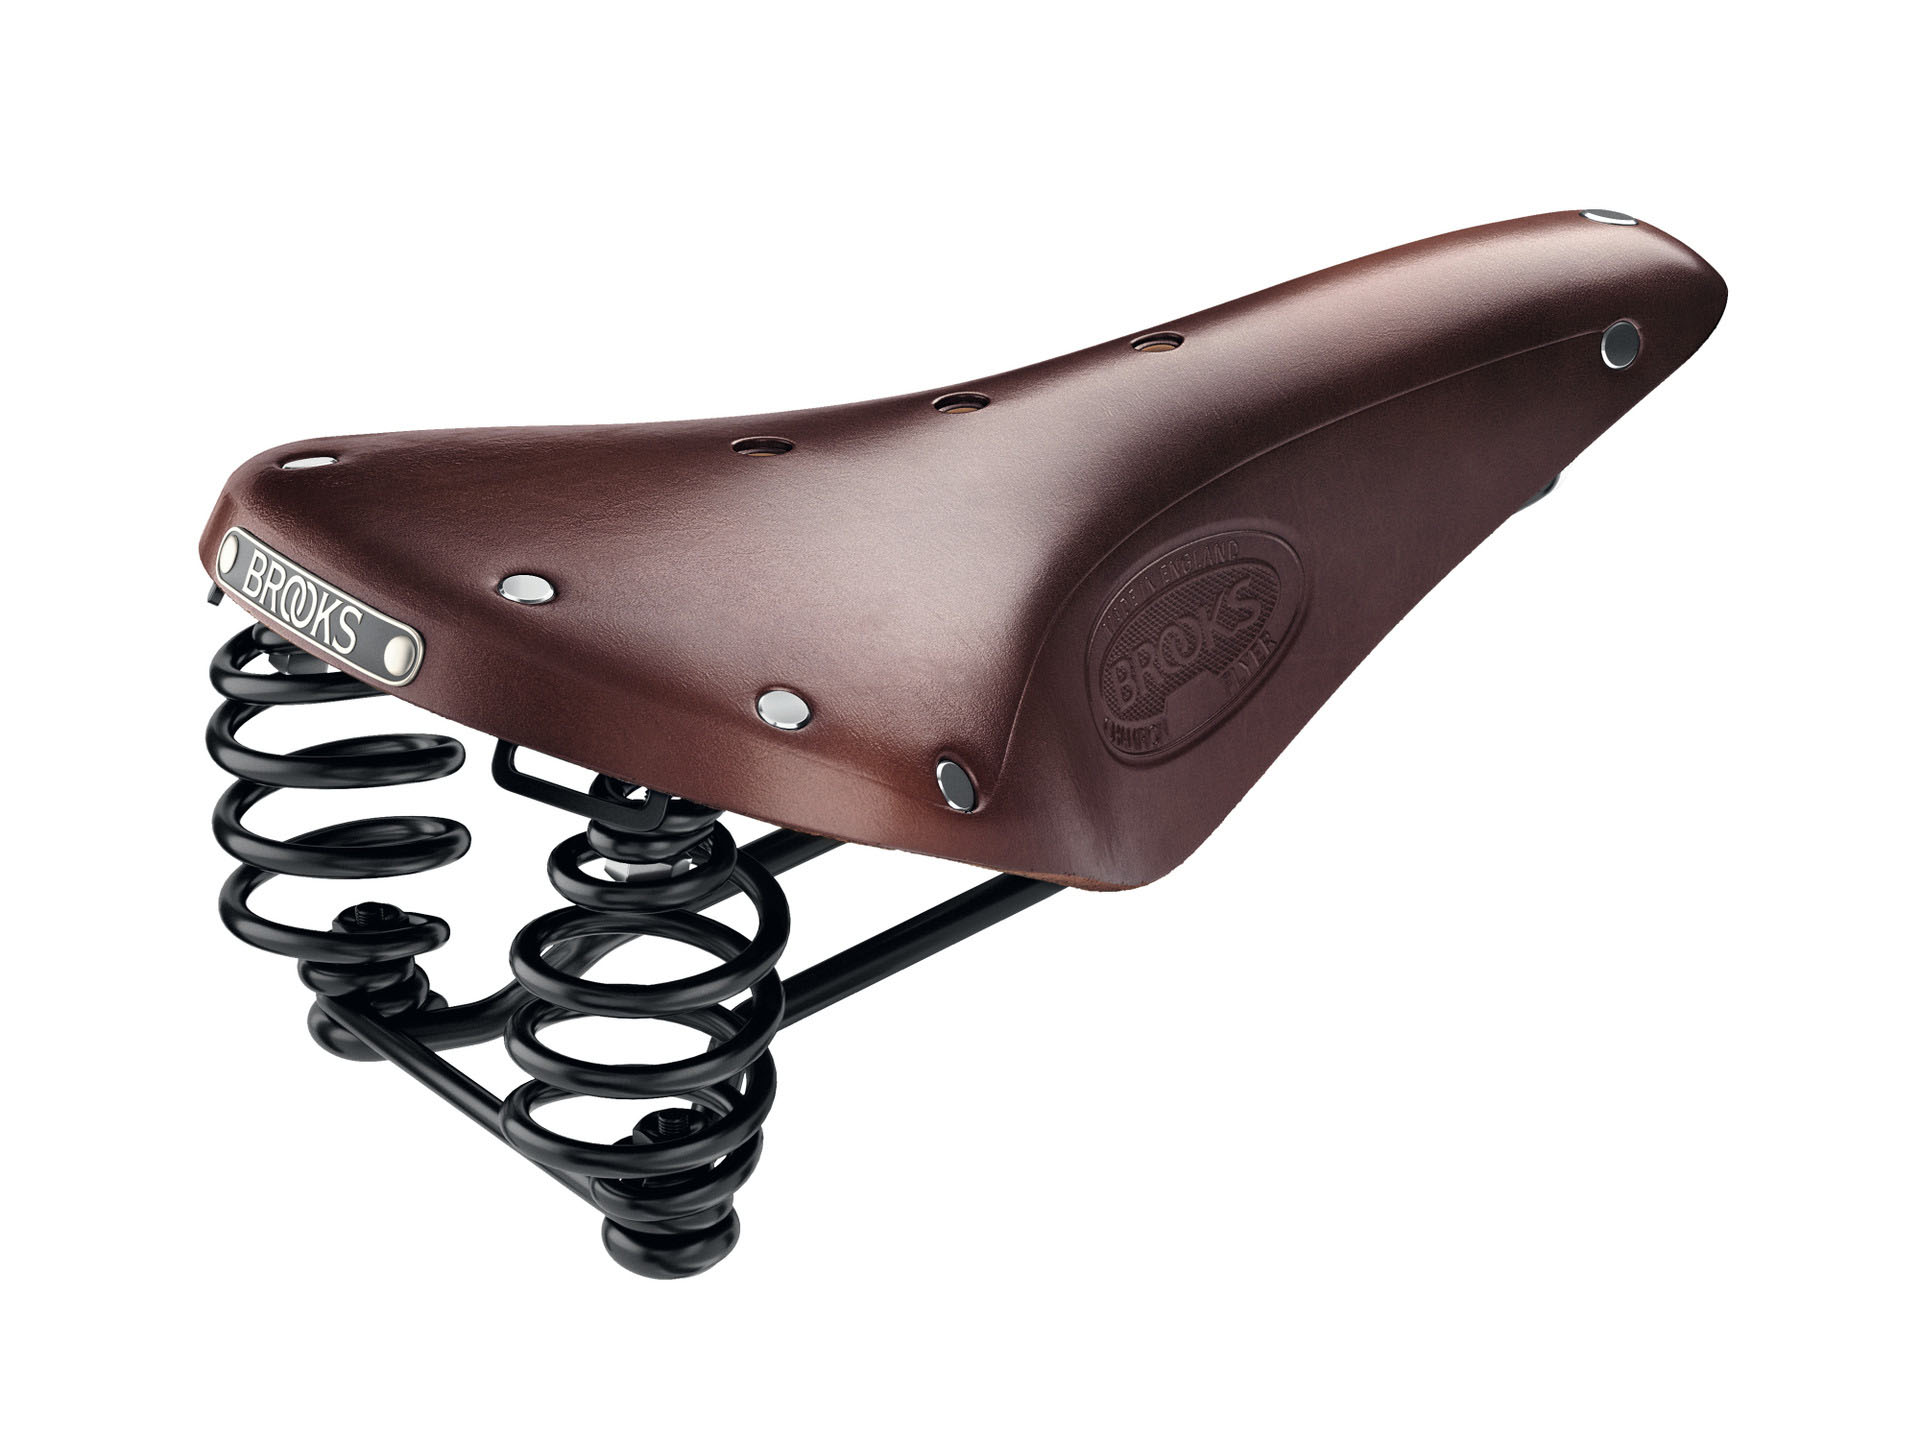 Brooks England Flyer Leather Saddle with Springs - Handcrafted in England